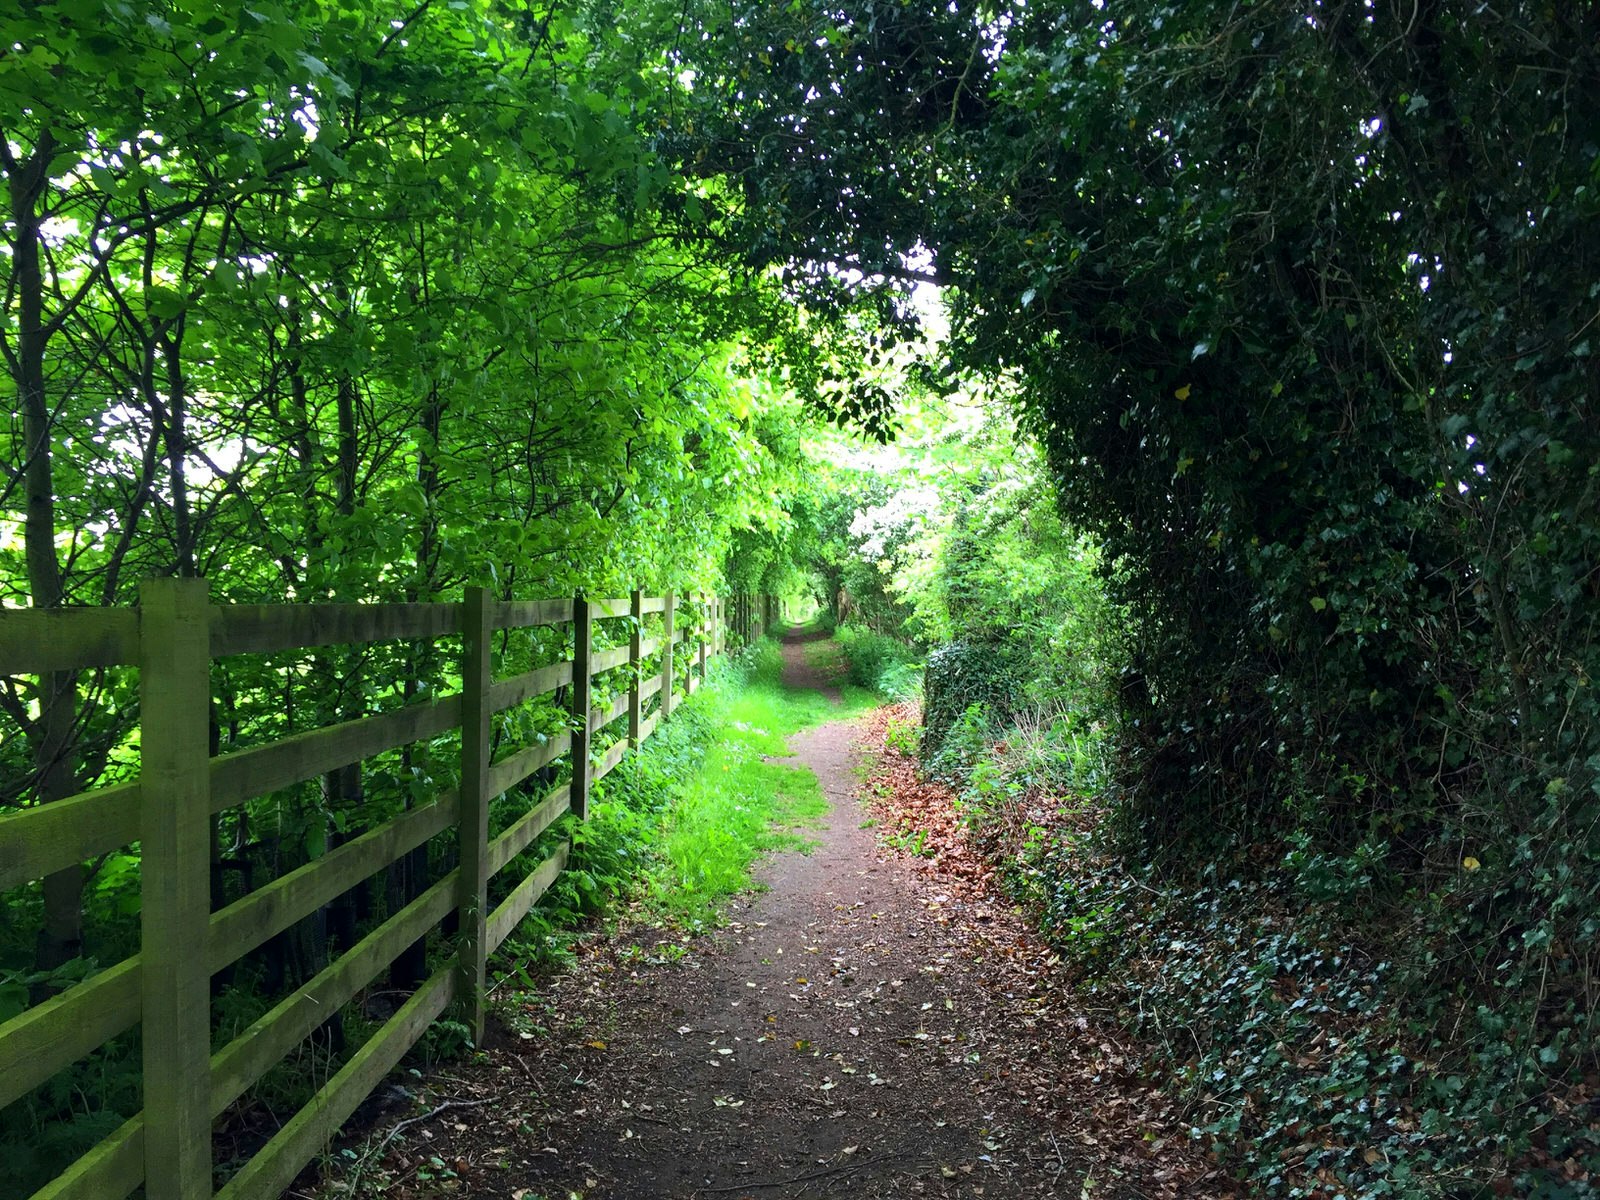 Trees form a holloway over a path with a fence to the left side